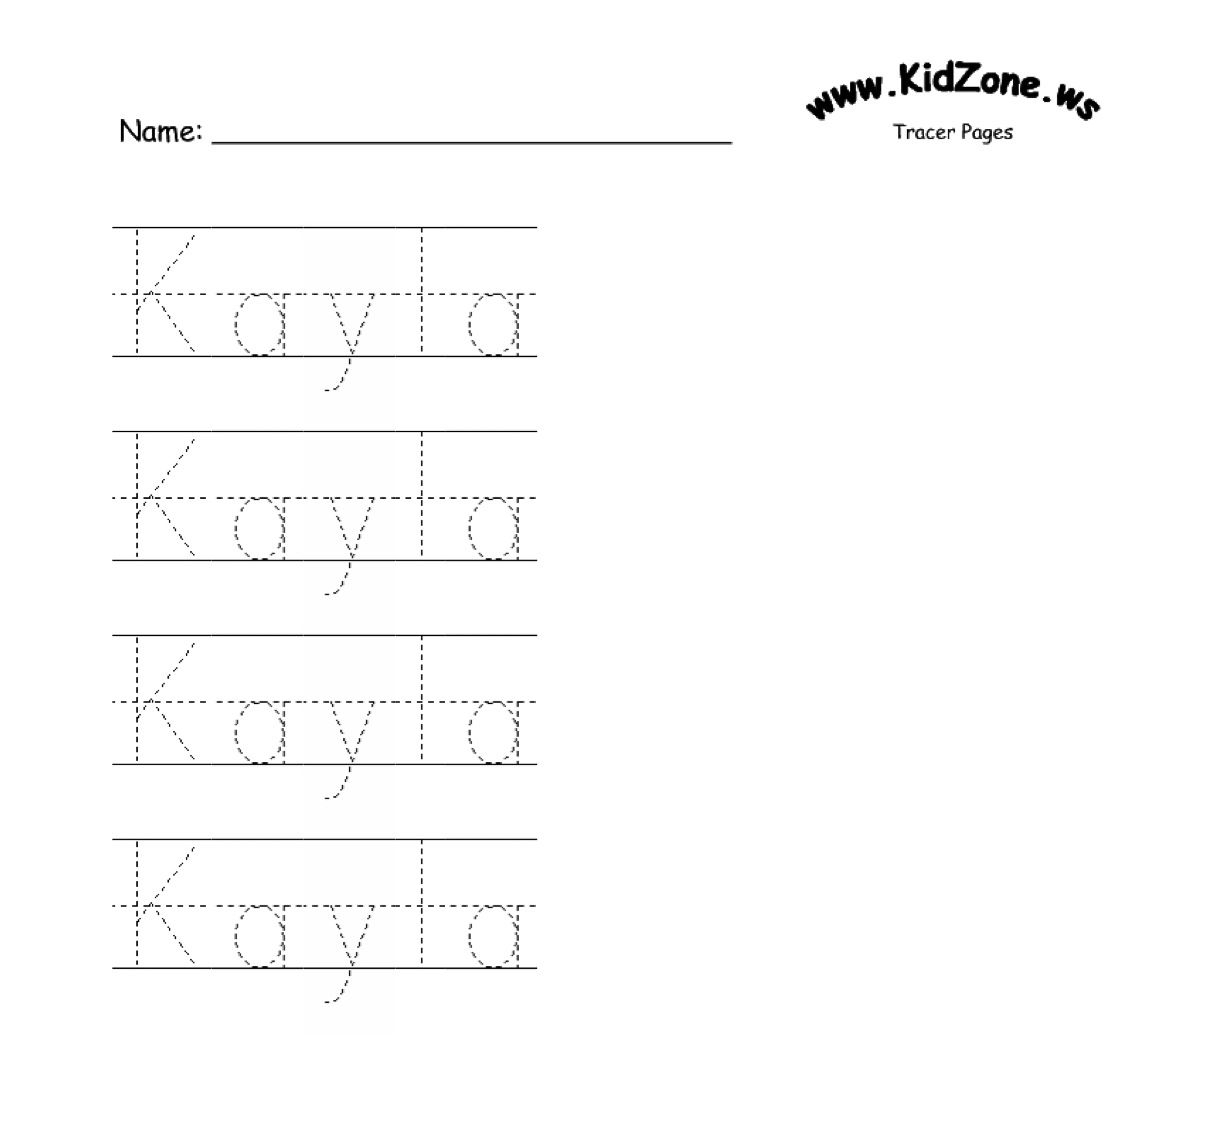 Custom Name Tracer Pages | Preschool Writing, Name Tracing throughout Kidzone Name Tracing